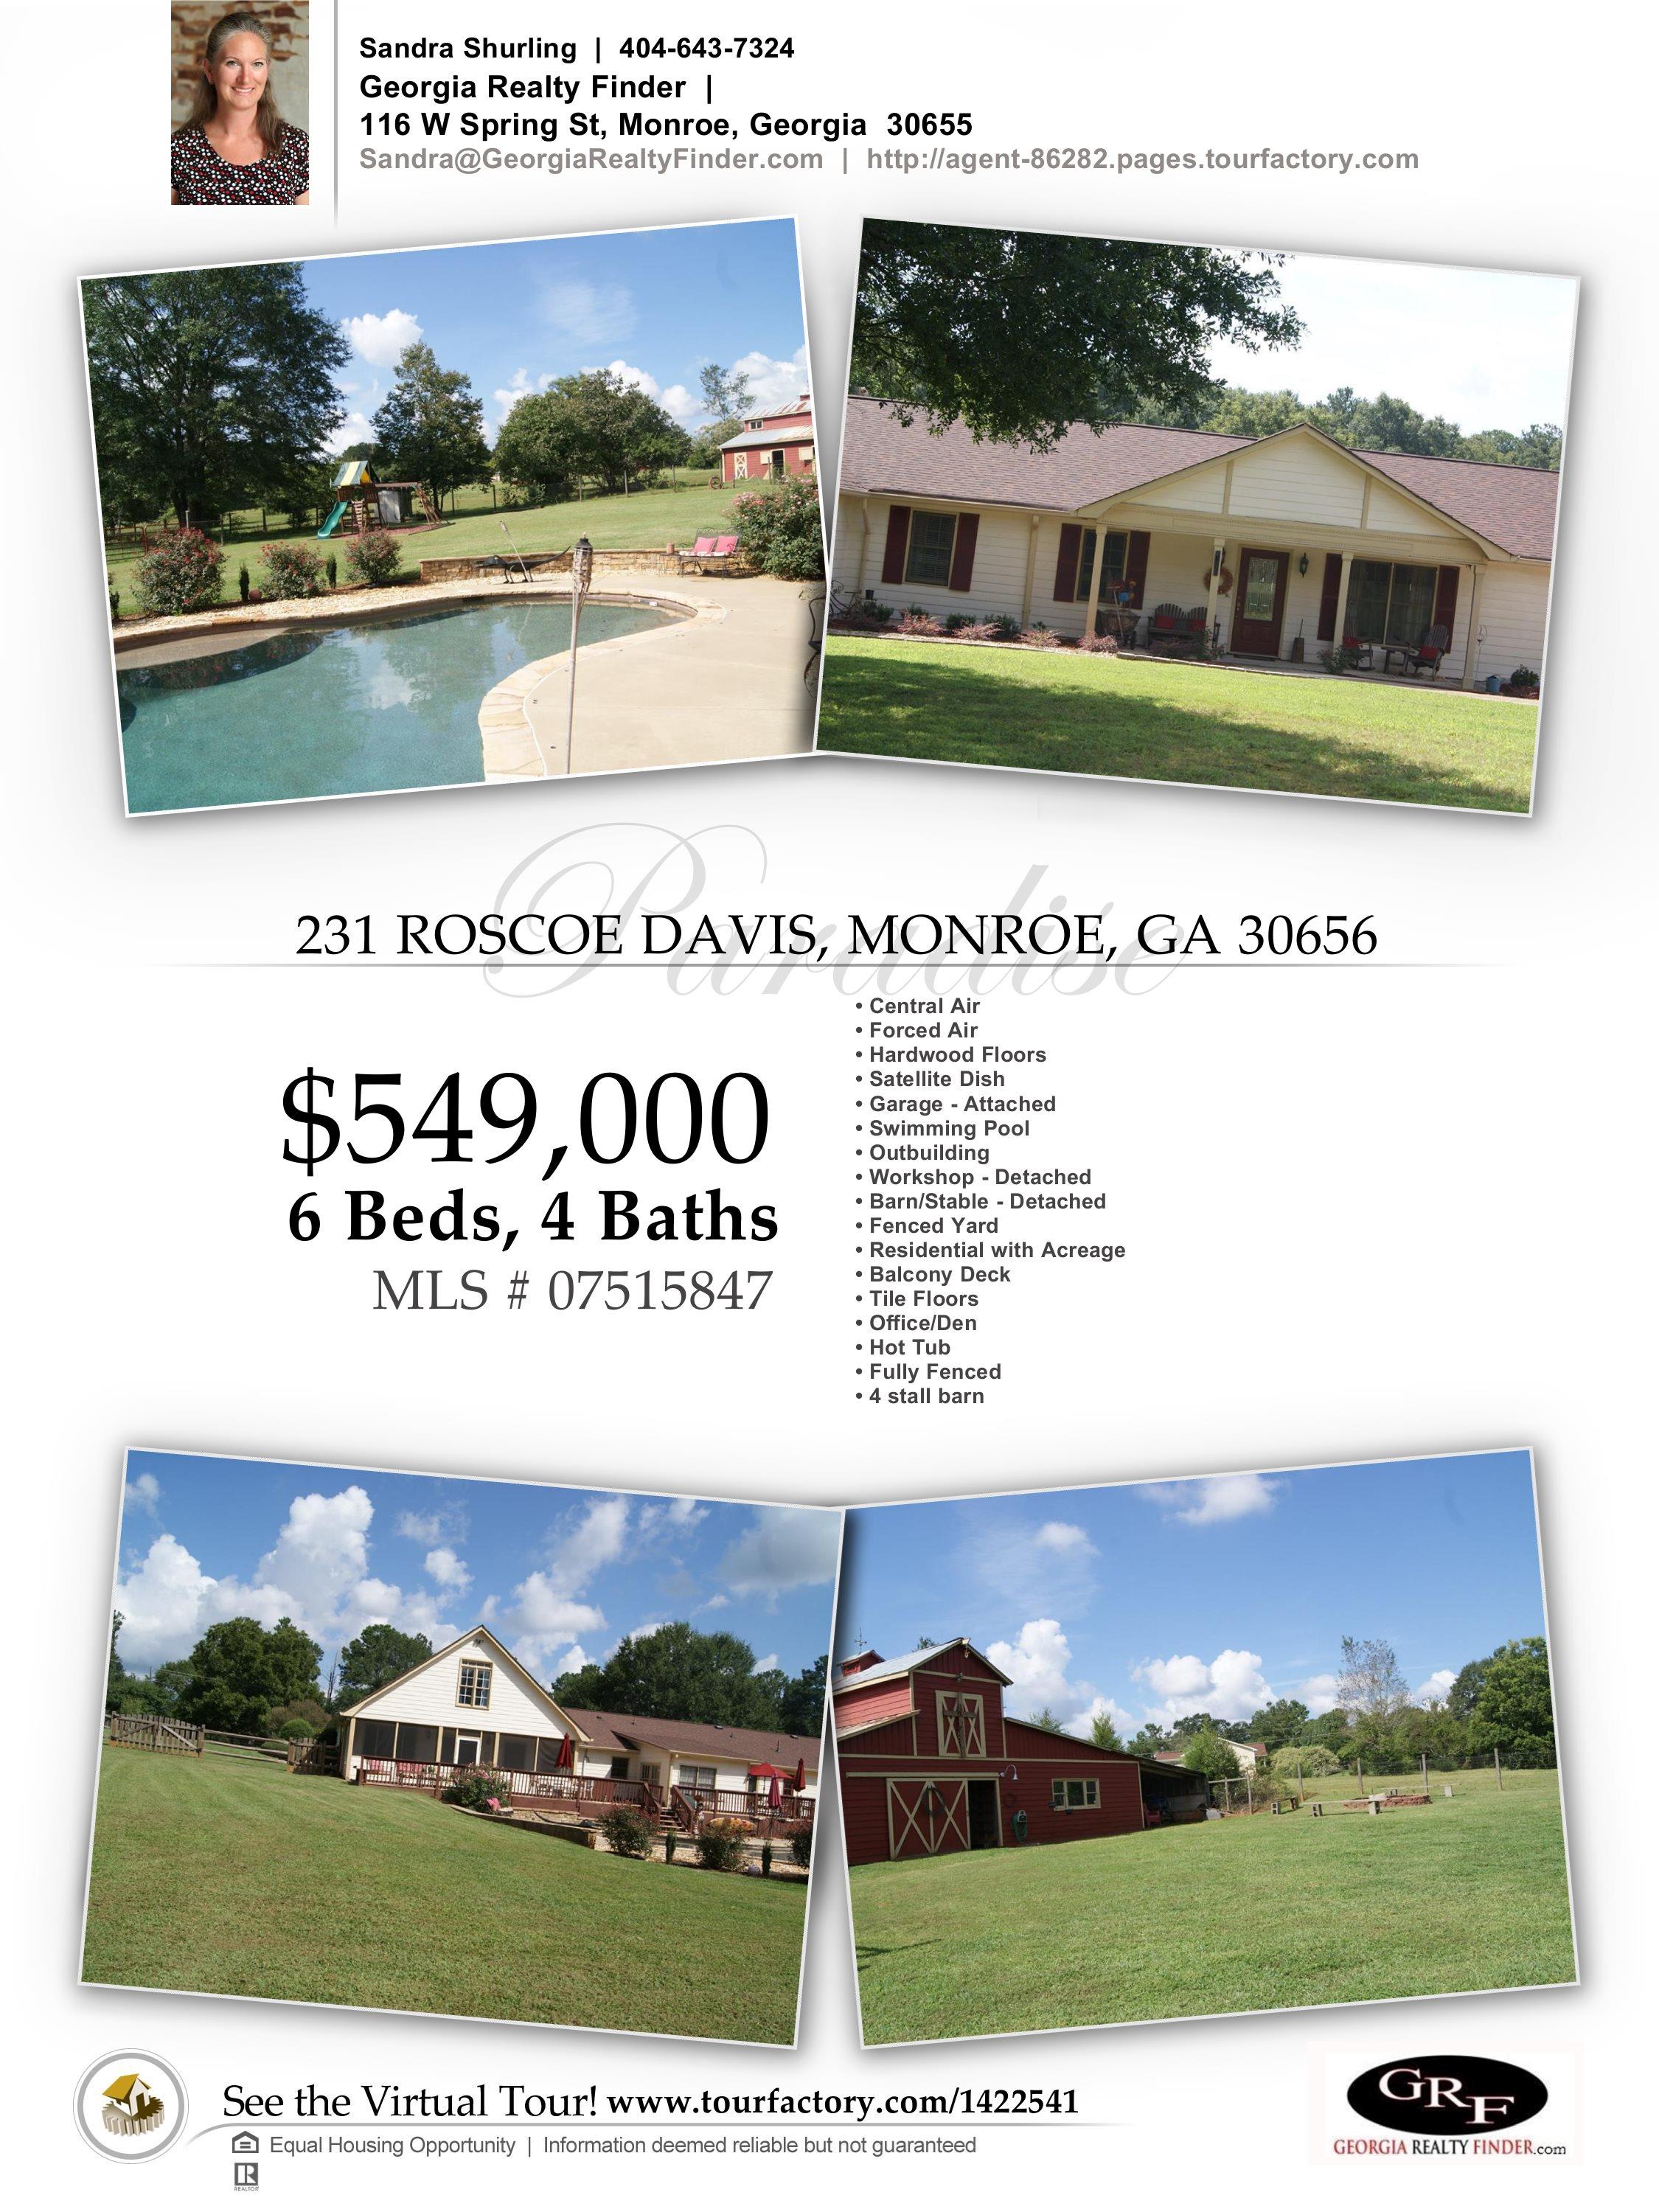 This gorgeous ranch style home is located at 231 Roscoe Davis, Monroe, Georgia 30656. A swimming pool, detached barn/stable and workshop, hot tube and 4 stall barn are just a few of the amenities with this property. For more information on this property, follow this link: http://www.tourfactory.com/idxr1422541. 